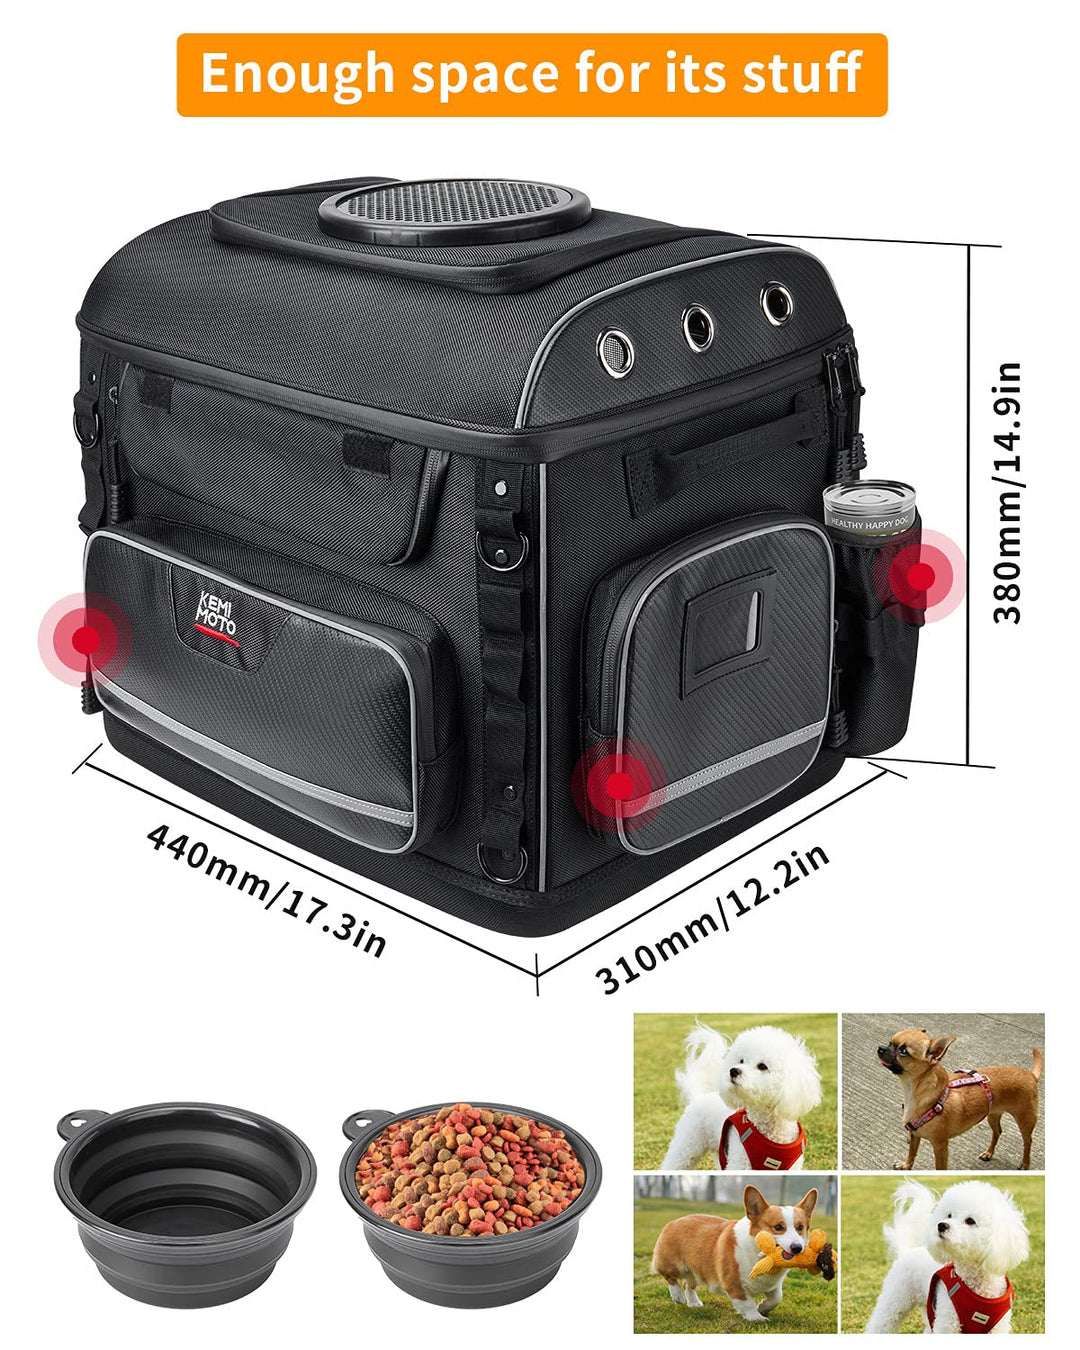 Motorcycle Dog Carrier for Sharing the Ride with Your Big Dog